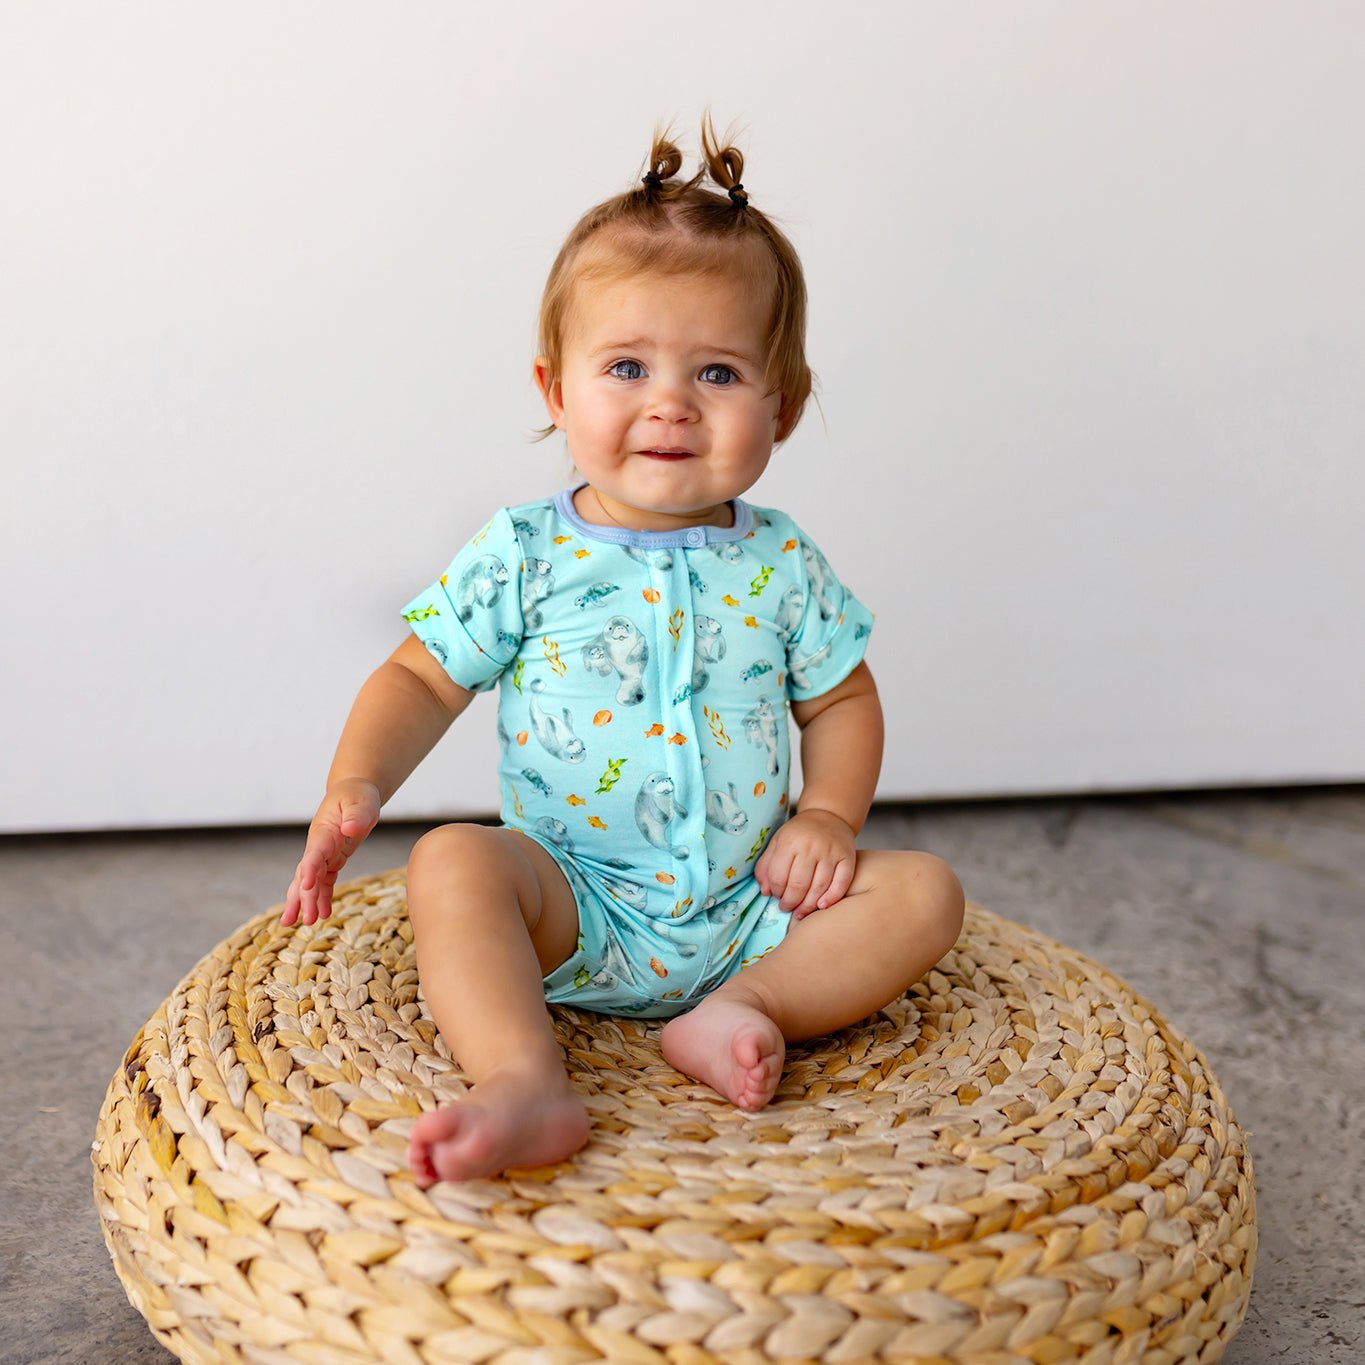 Get Your Float on Manatees Short Two-Way Zippy Romper (2T-3T) - Free Birdees